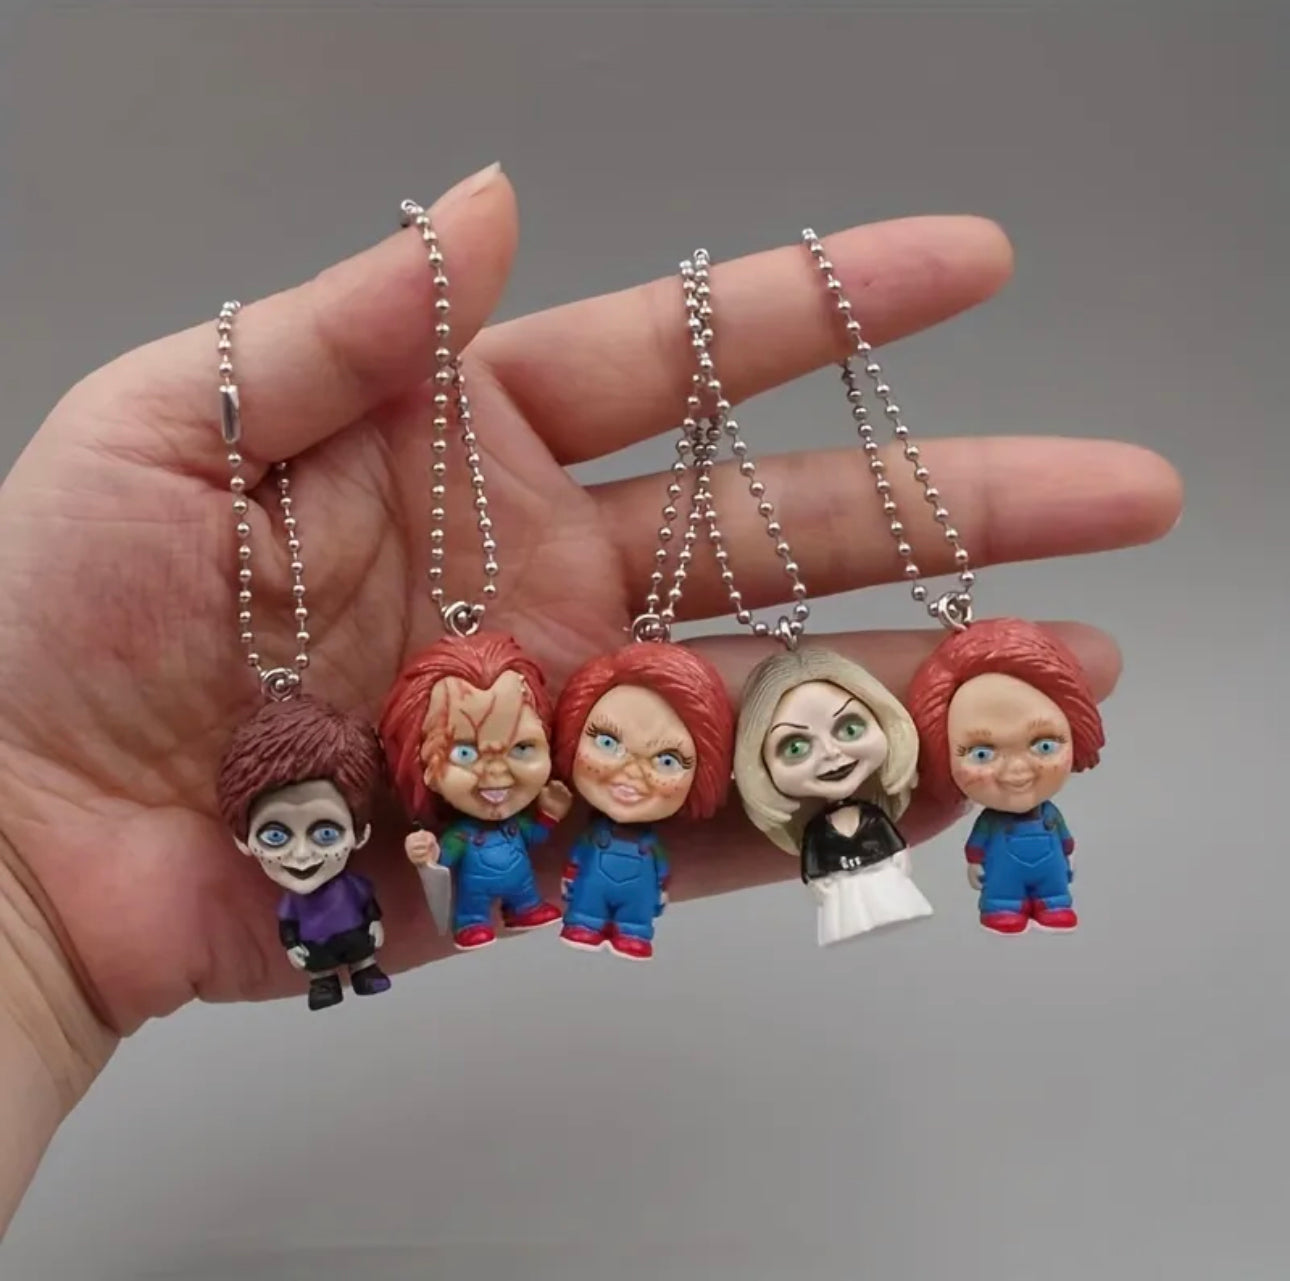 5 Unique Horror Doll Keychains - Add a Touch of Spooky Fun to Your Keys!